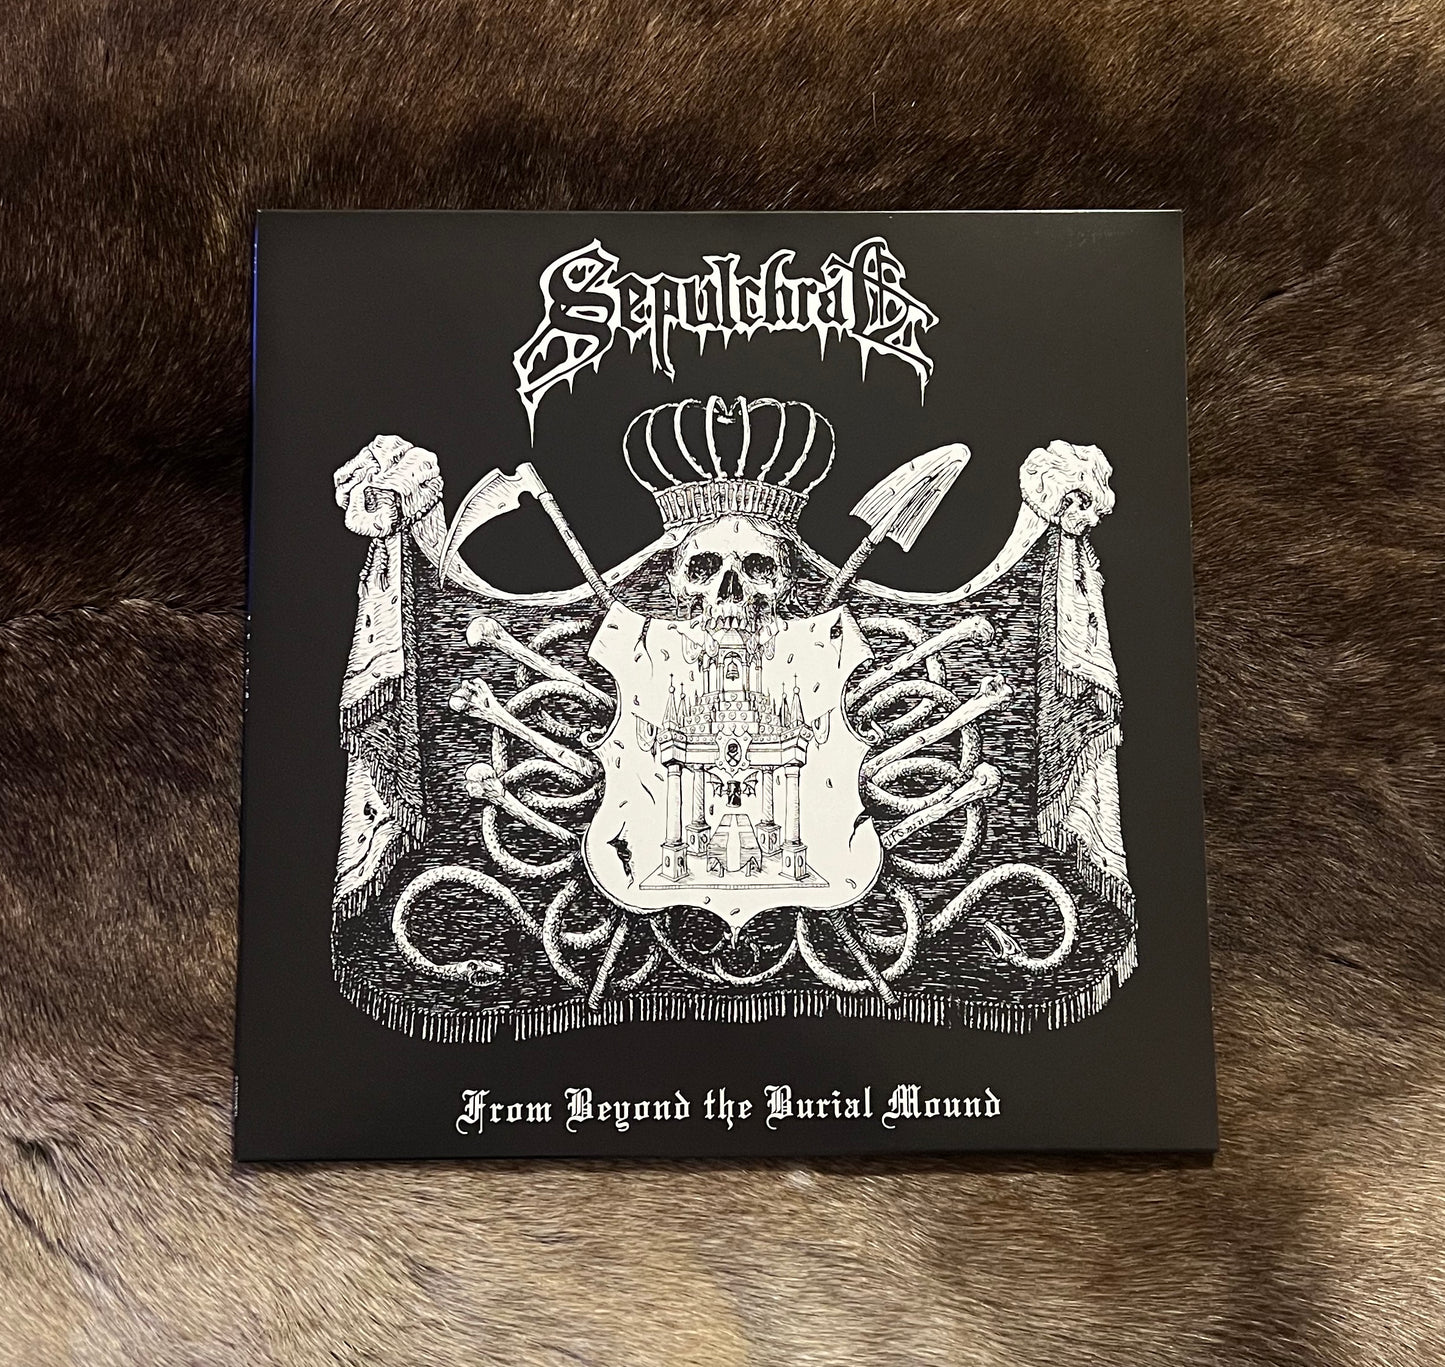 Sepulchral - From Beyond the Burial Mound 12" White Vinyl